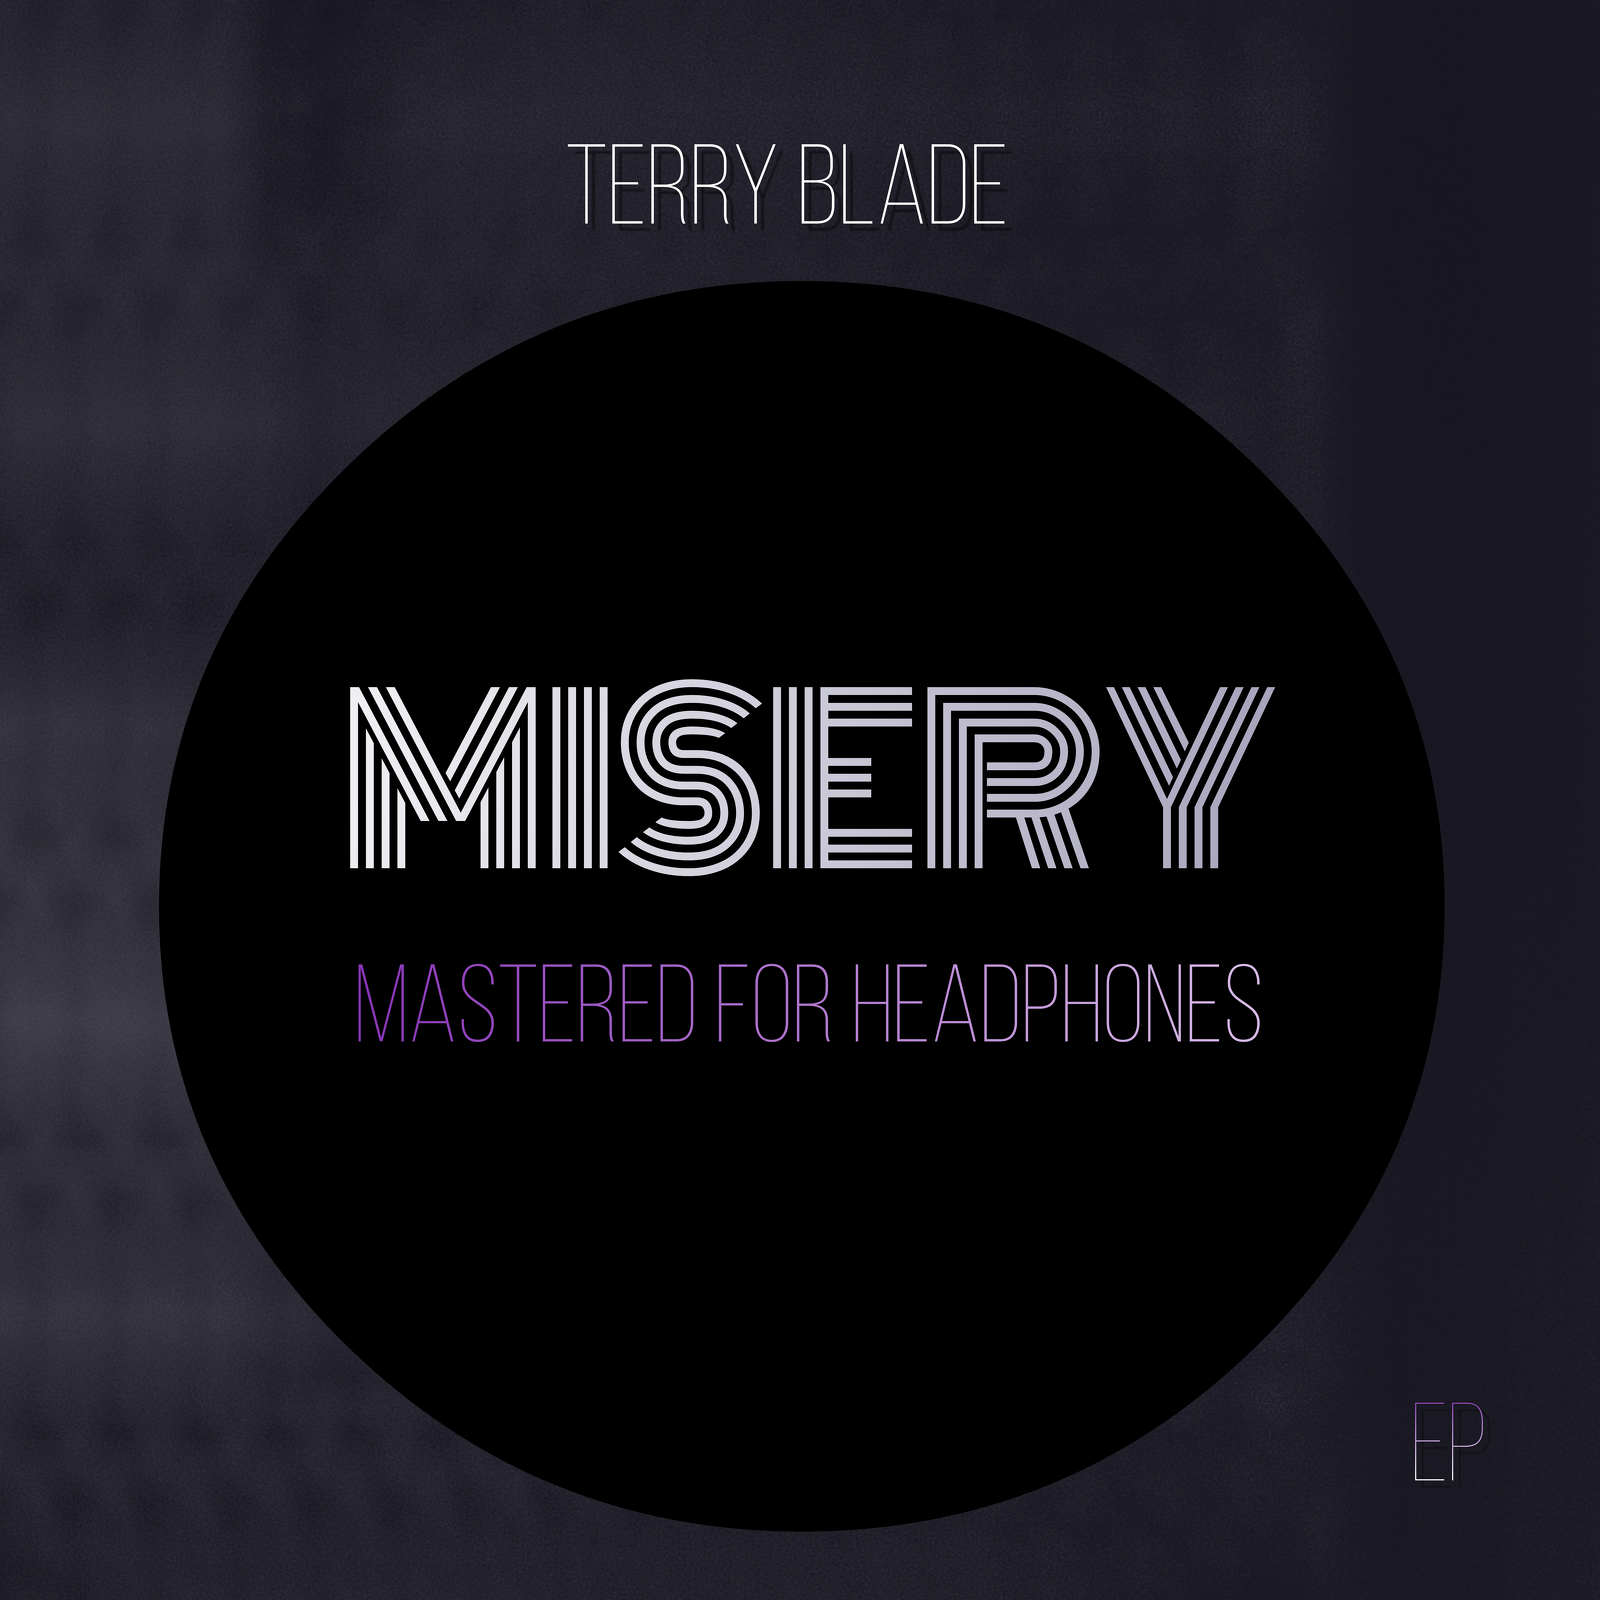 Terry Blade - Misery